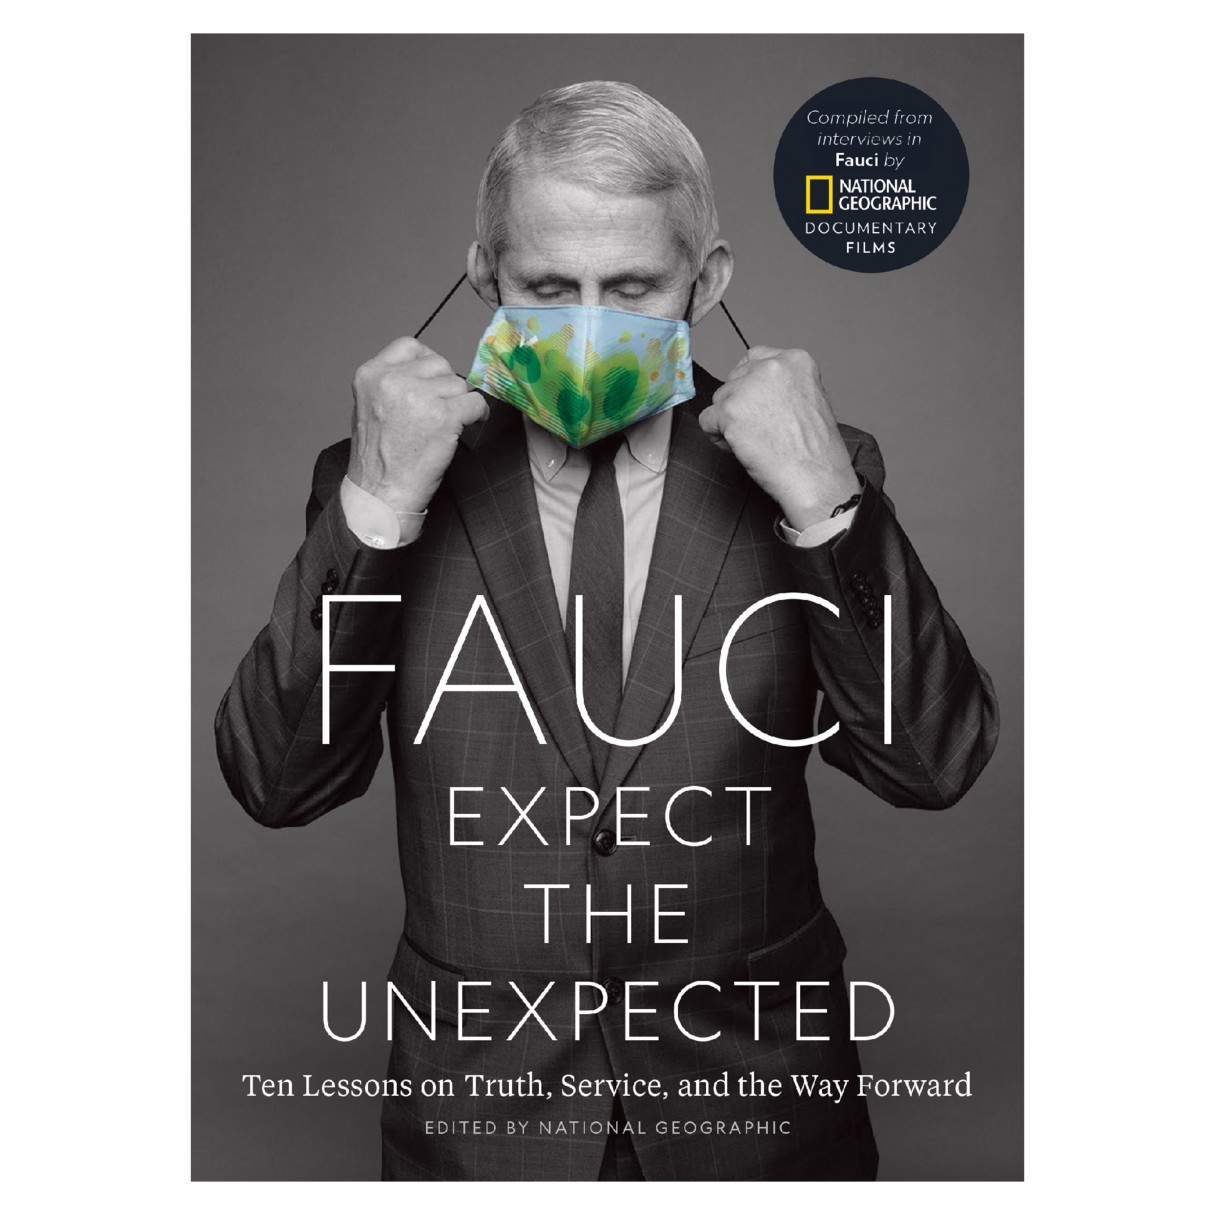 Fauci: Expect the Unexpected Book – National Geographic